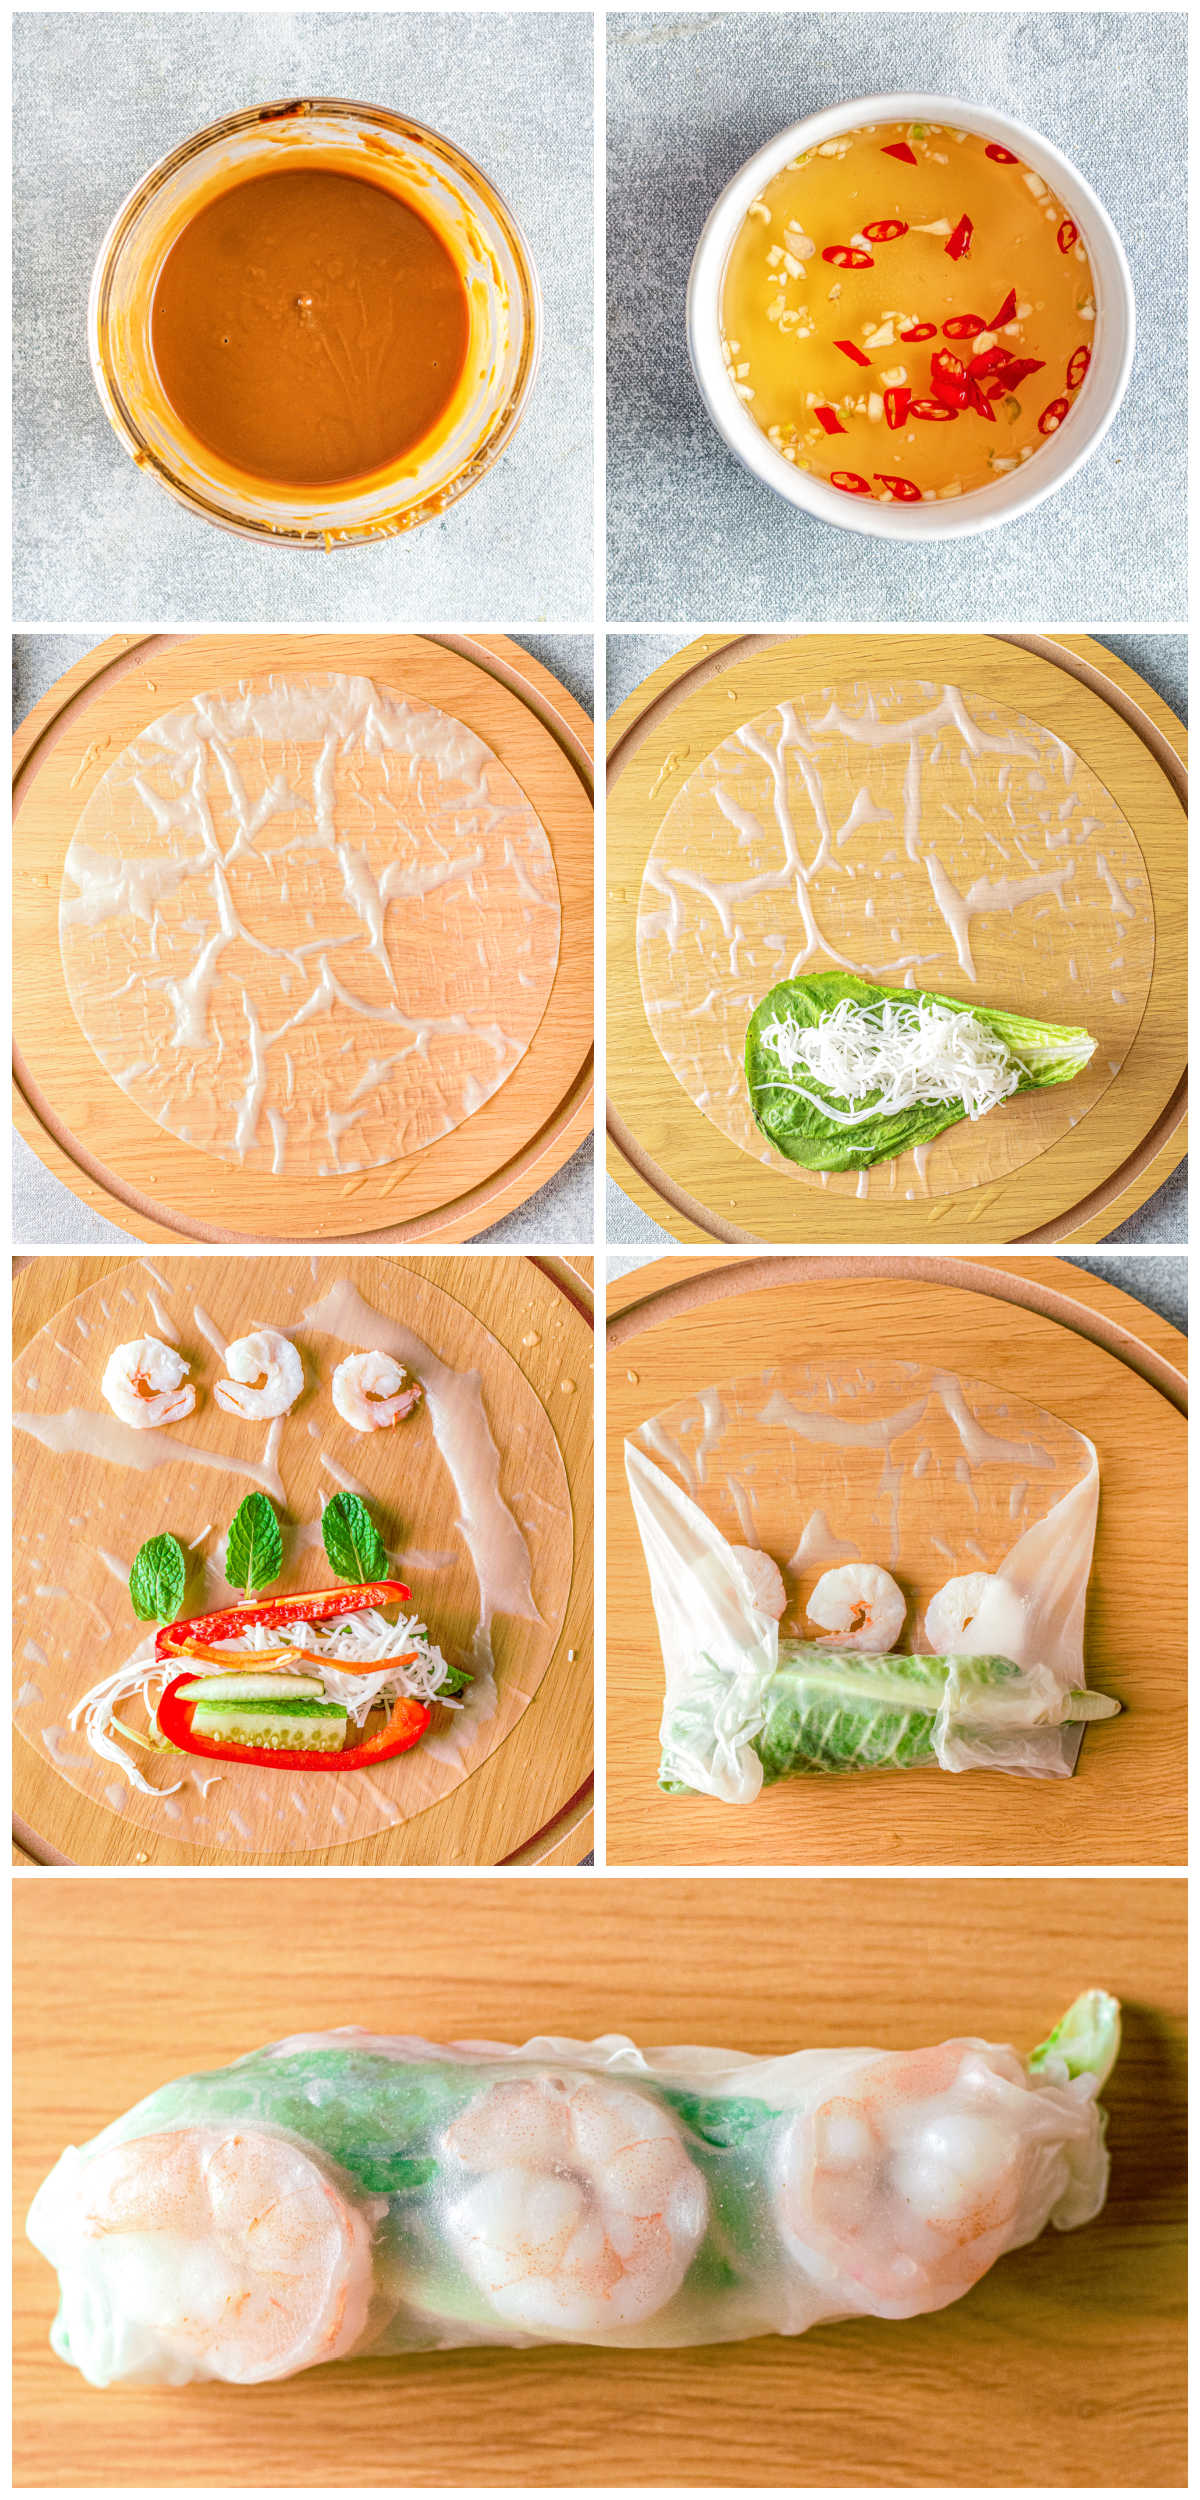 A picture collage showing how to make this Vietnamese Summer Rolls recipe.